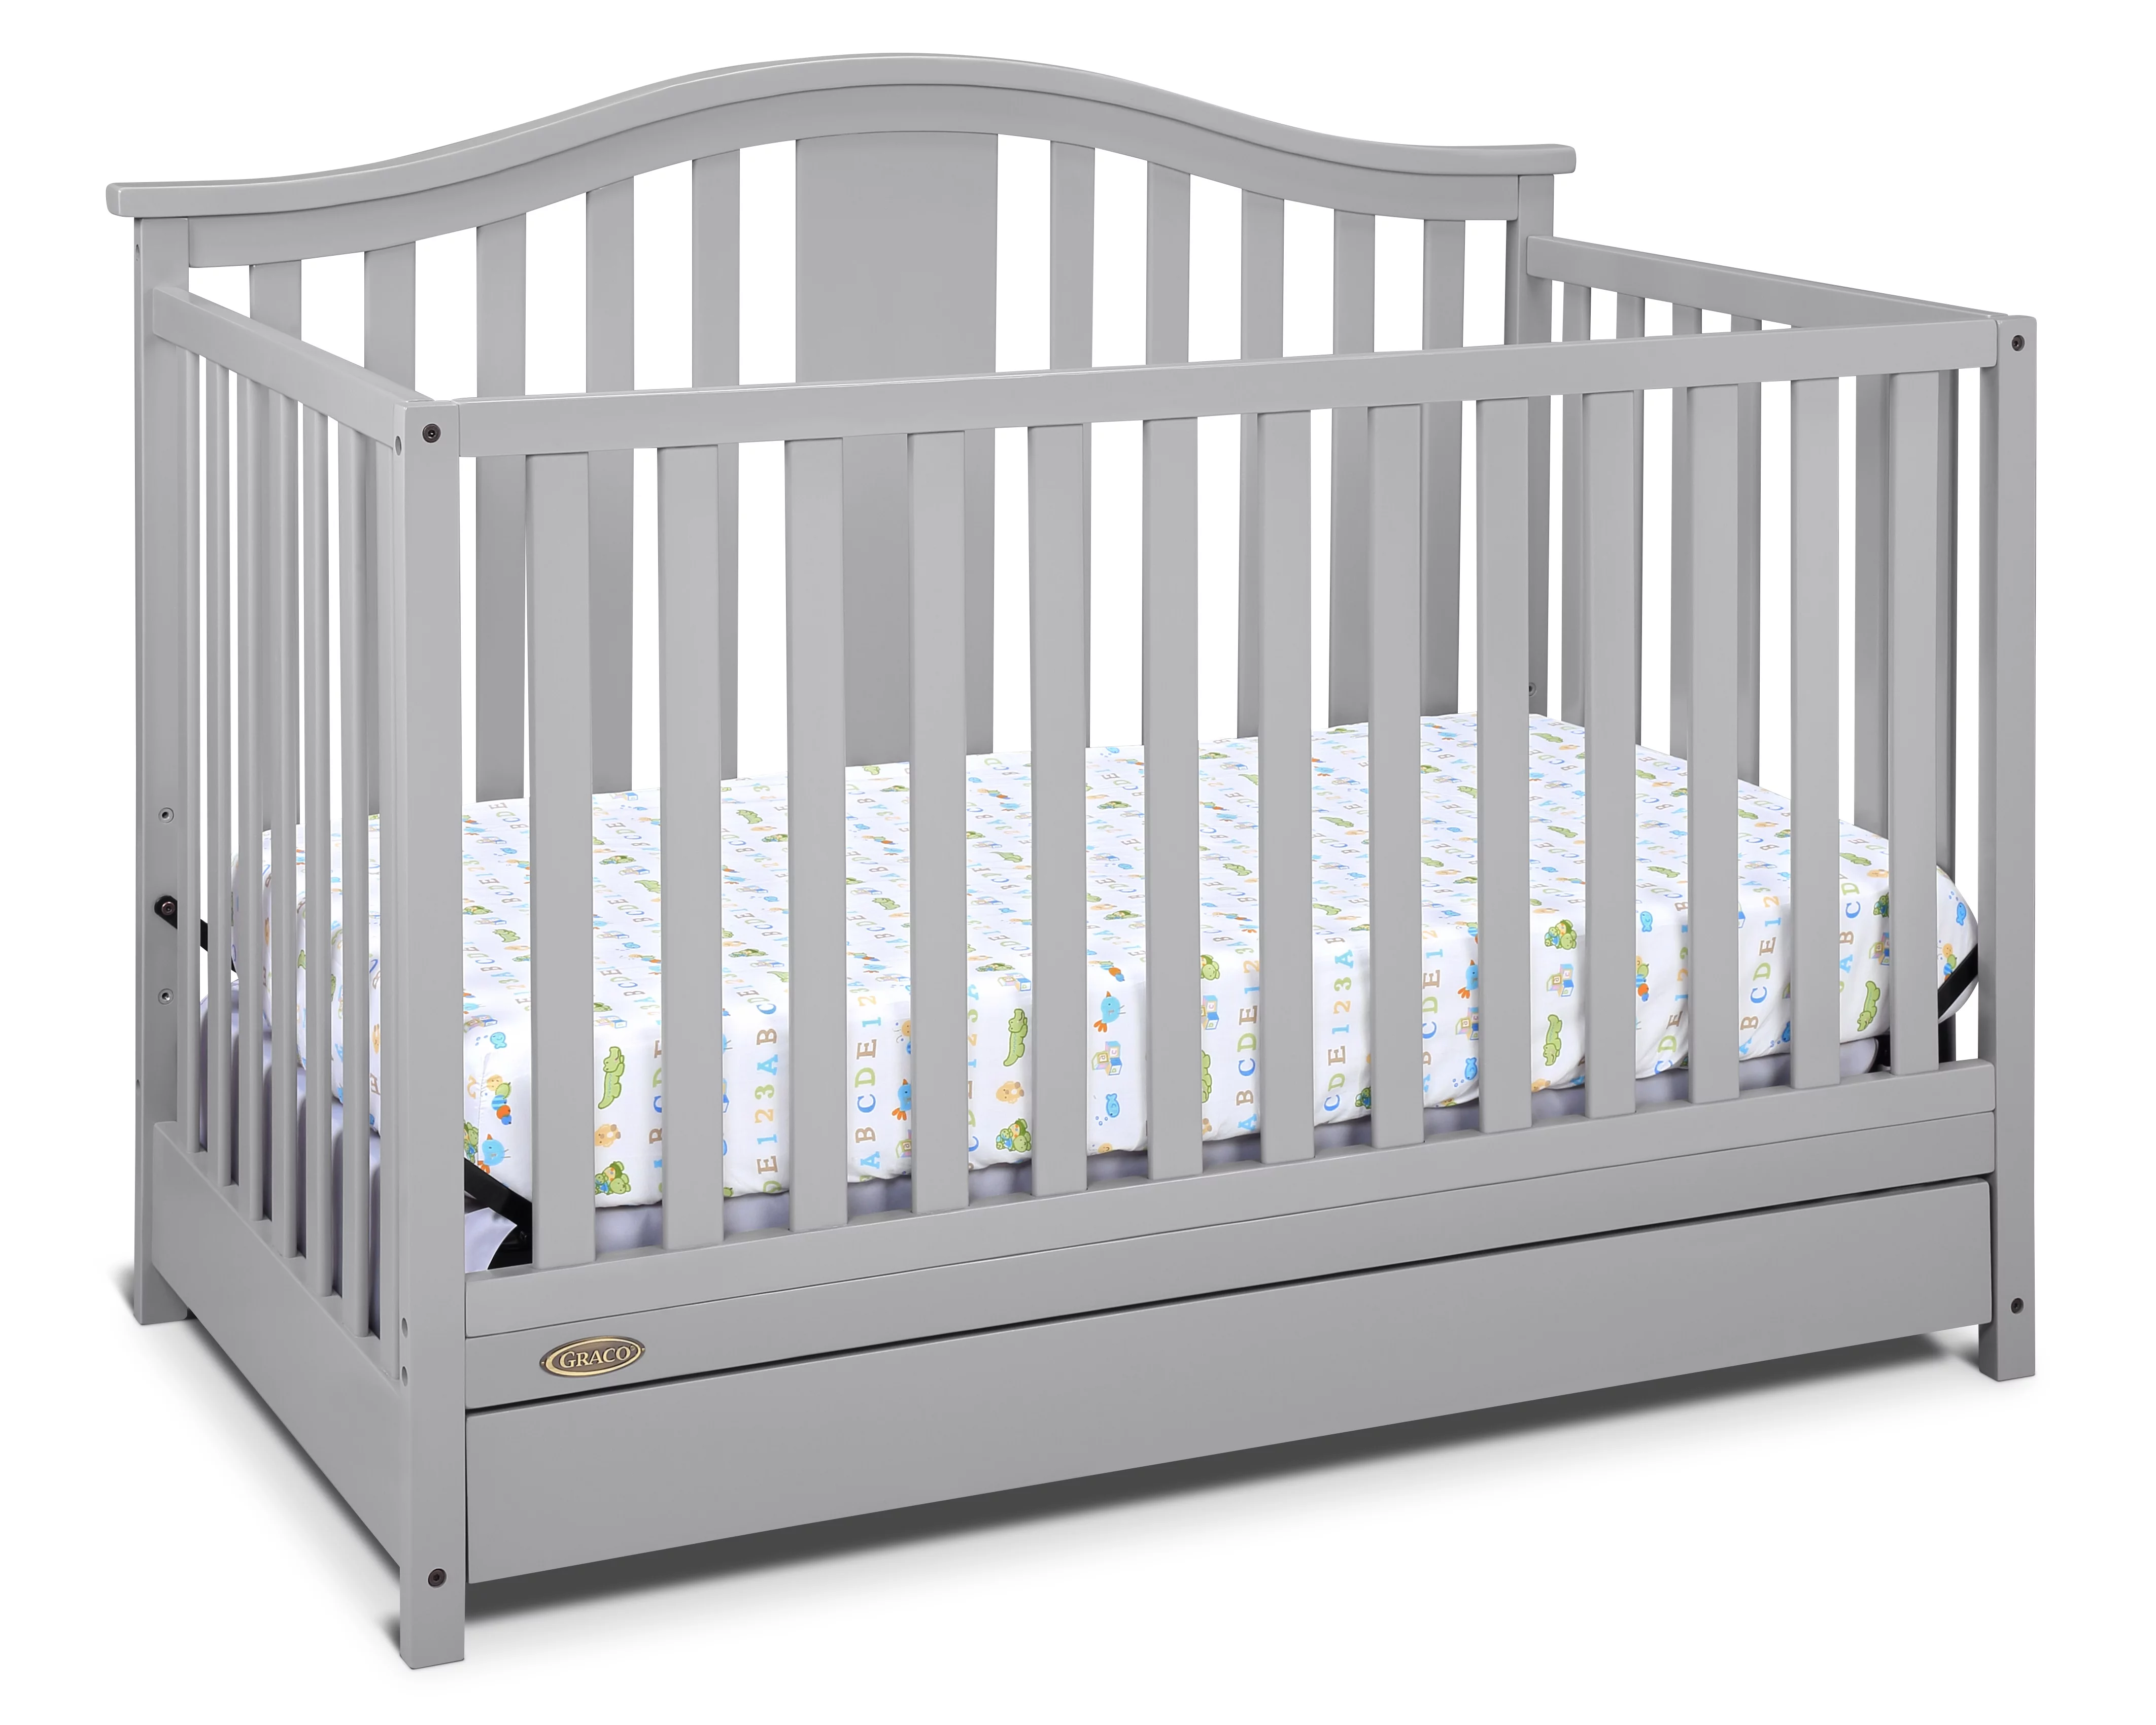 Graco Solano 4 in 1 Convertible Crib with Drawer Pebble Gray